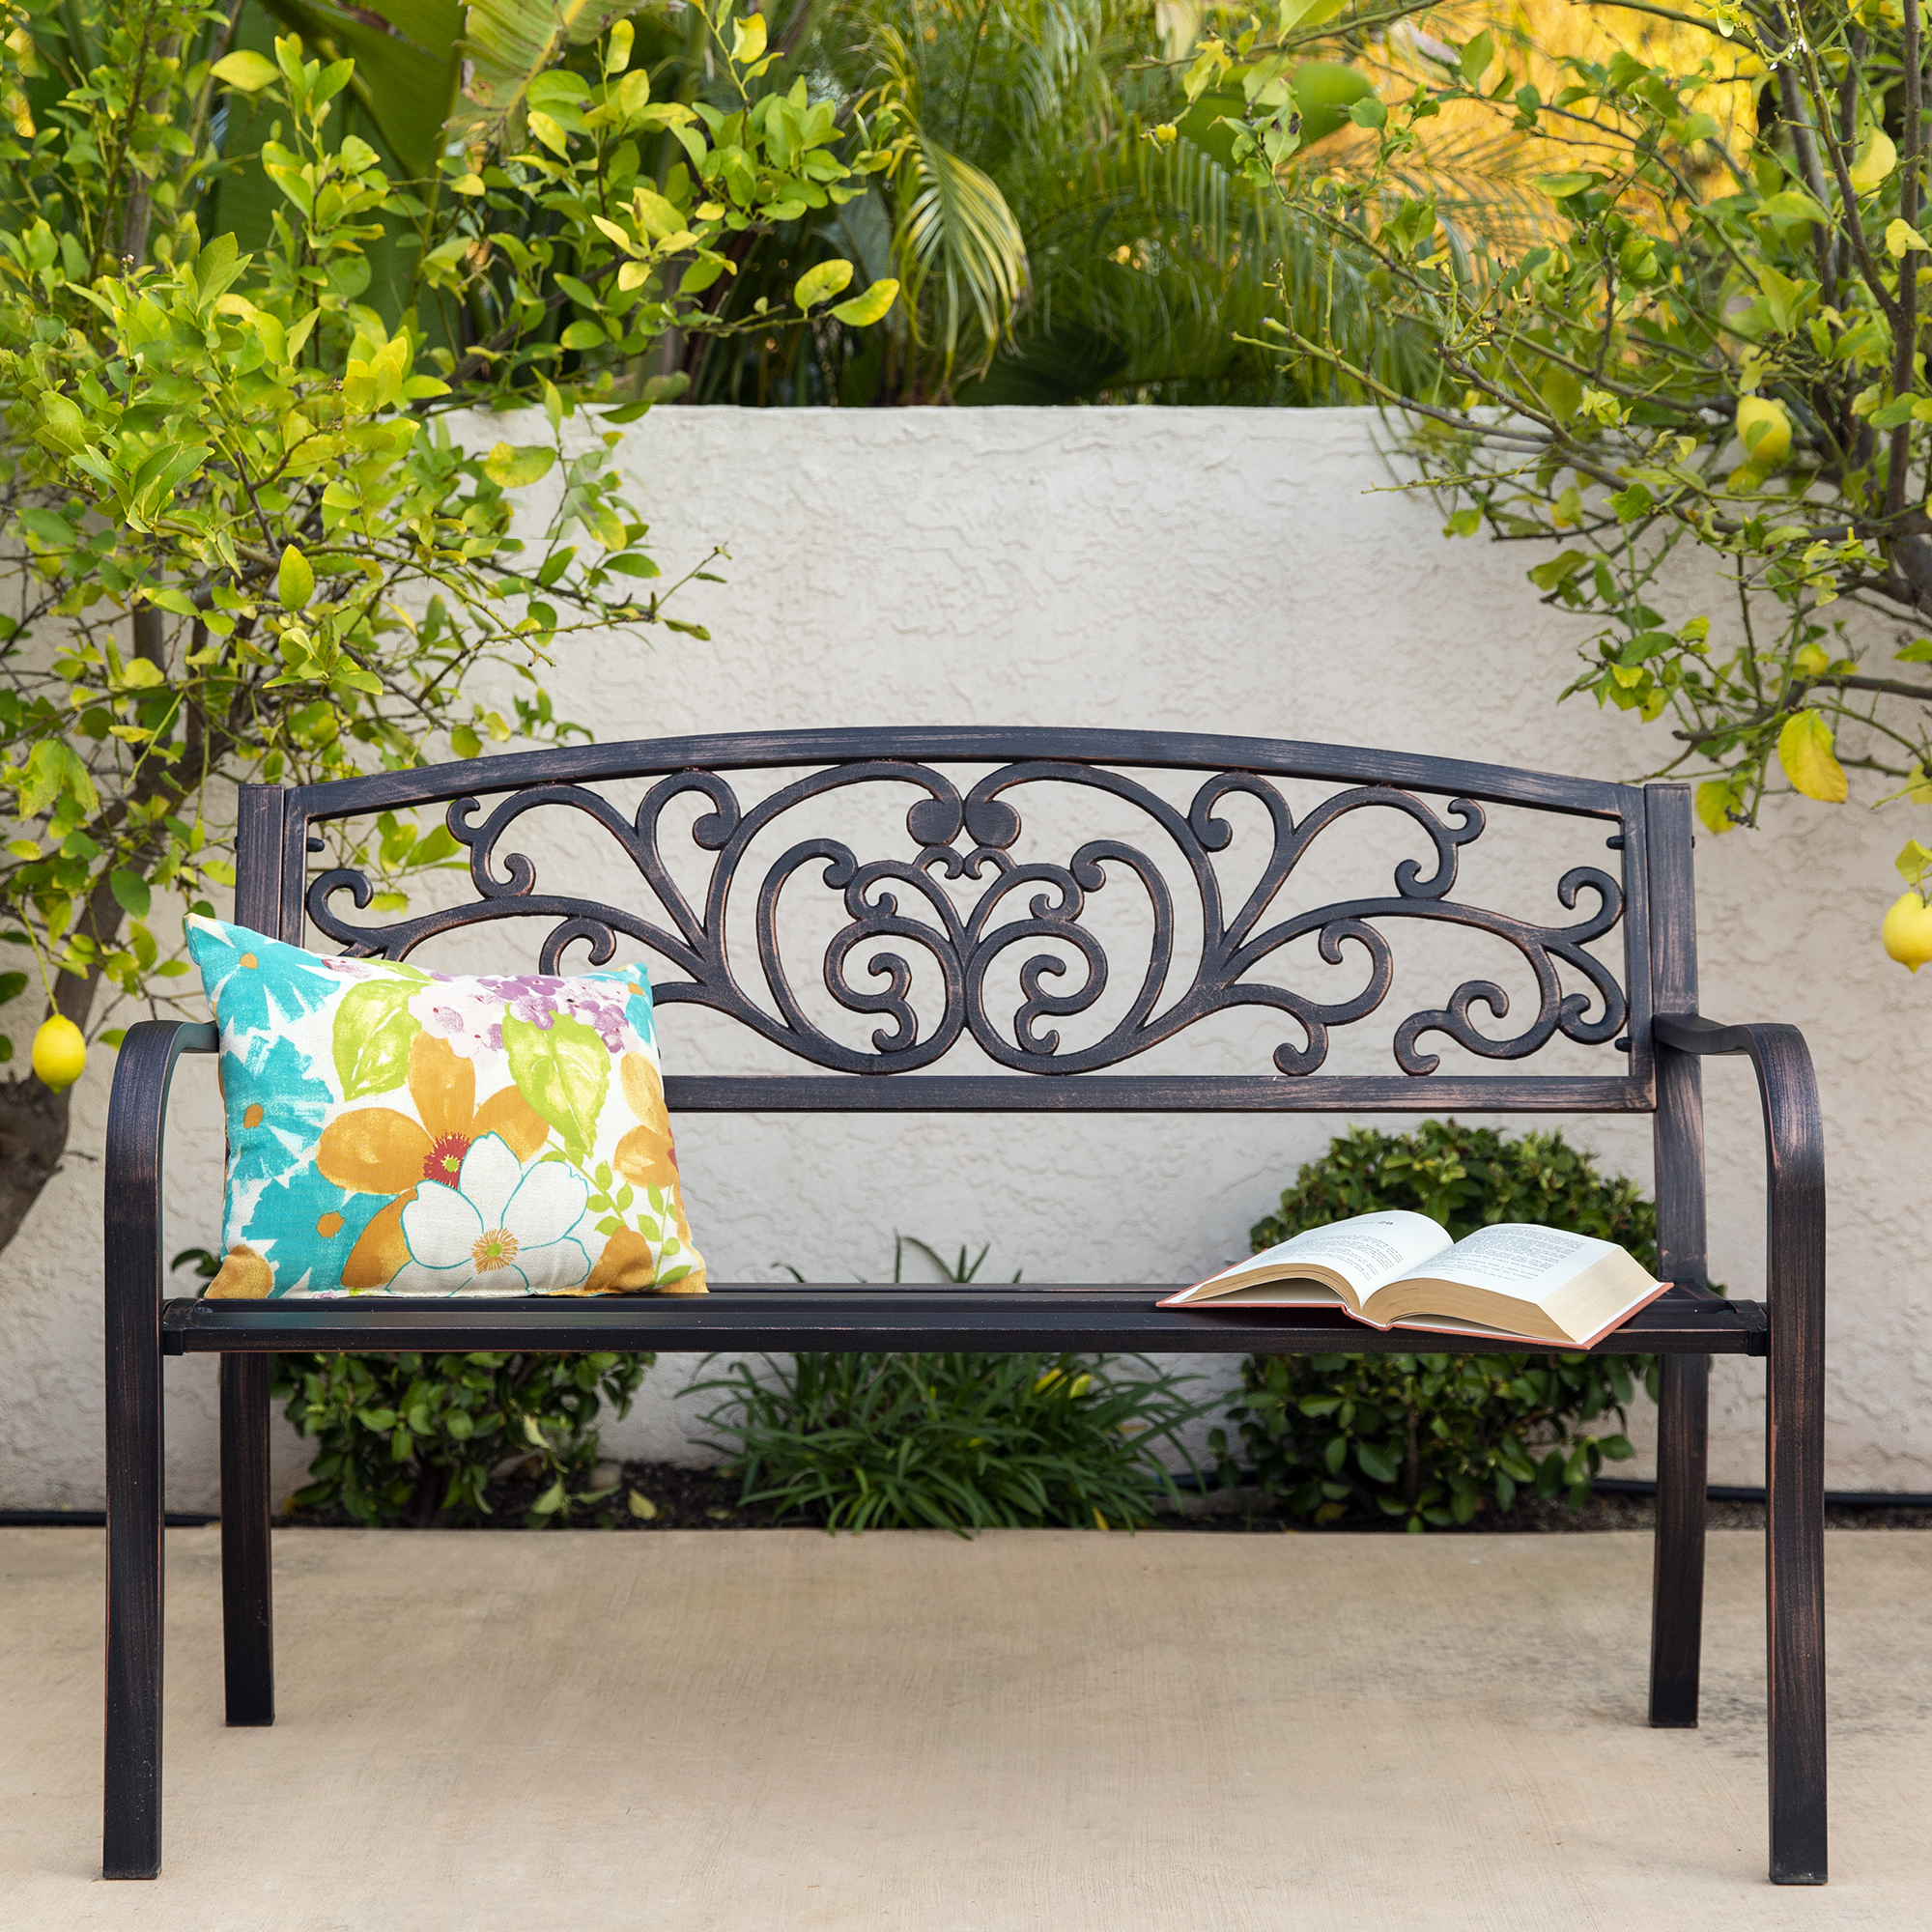 BCP 50in Steel Patio Garden Bench Accent Furniture w/ Floral Scroll ...